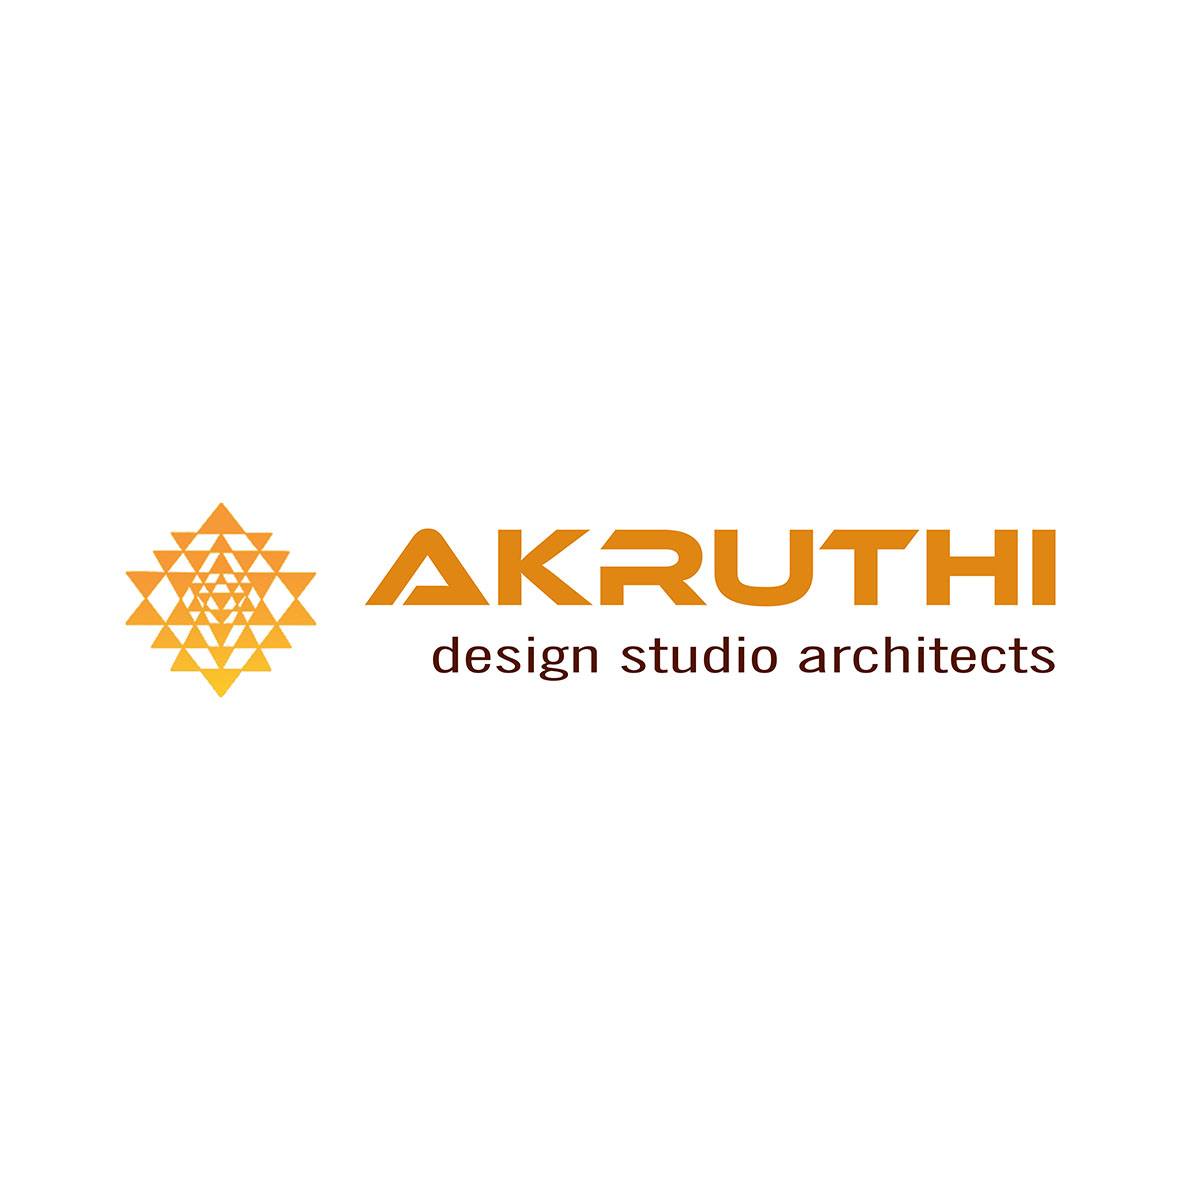 Akruthi Design Studio Architects|IT Services|Professional Services